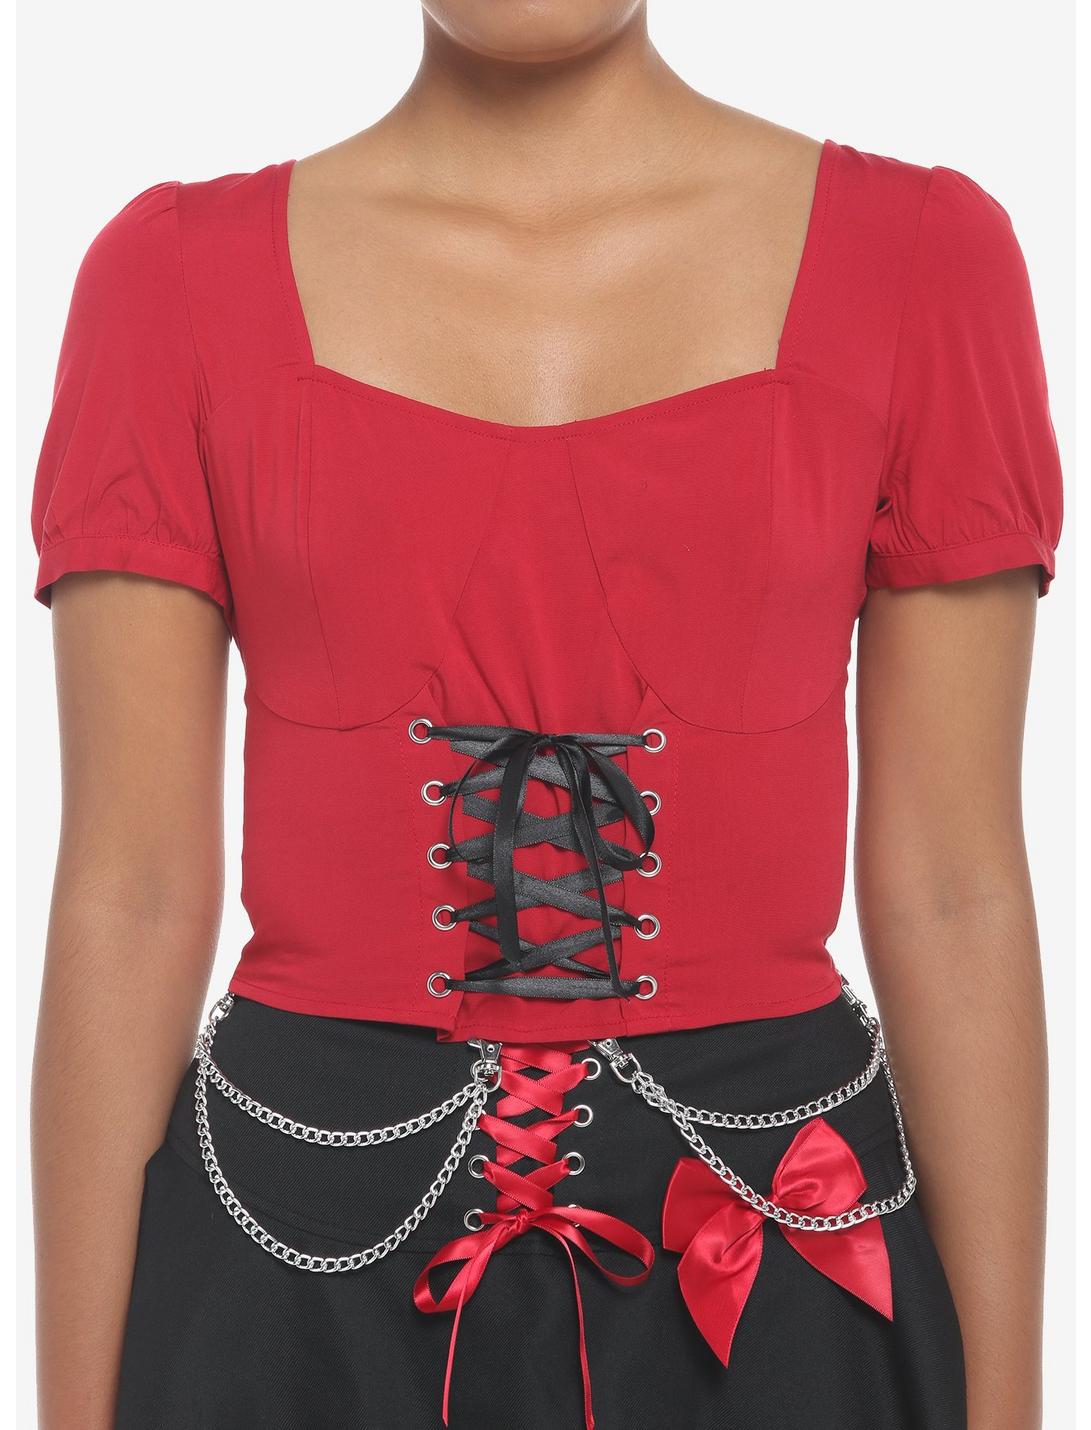 Red & Black Corset Lace-Up Girls Crop Top, RED, hi-res